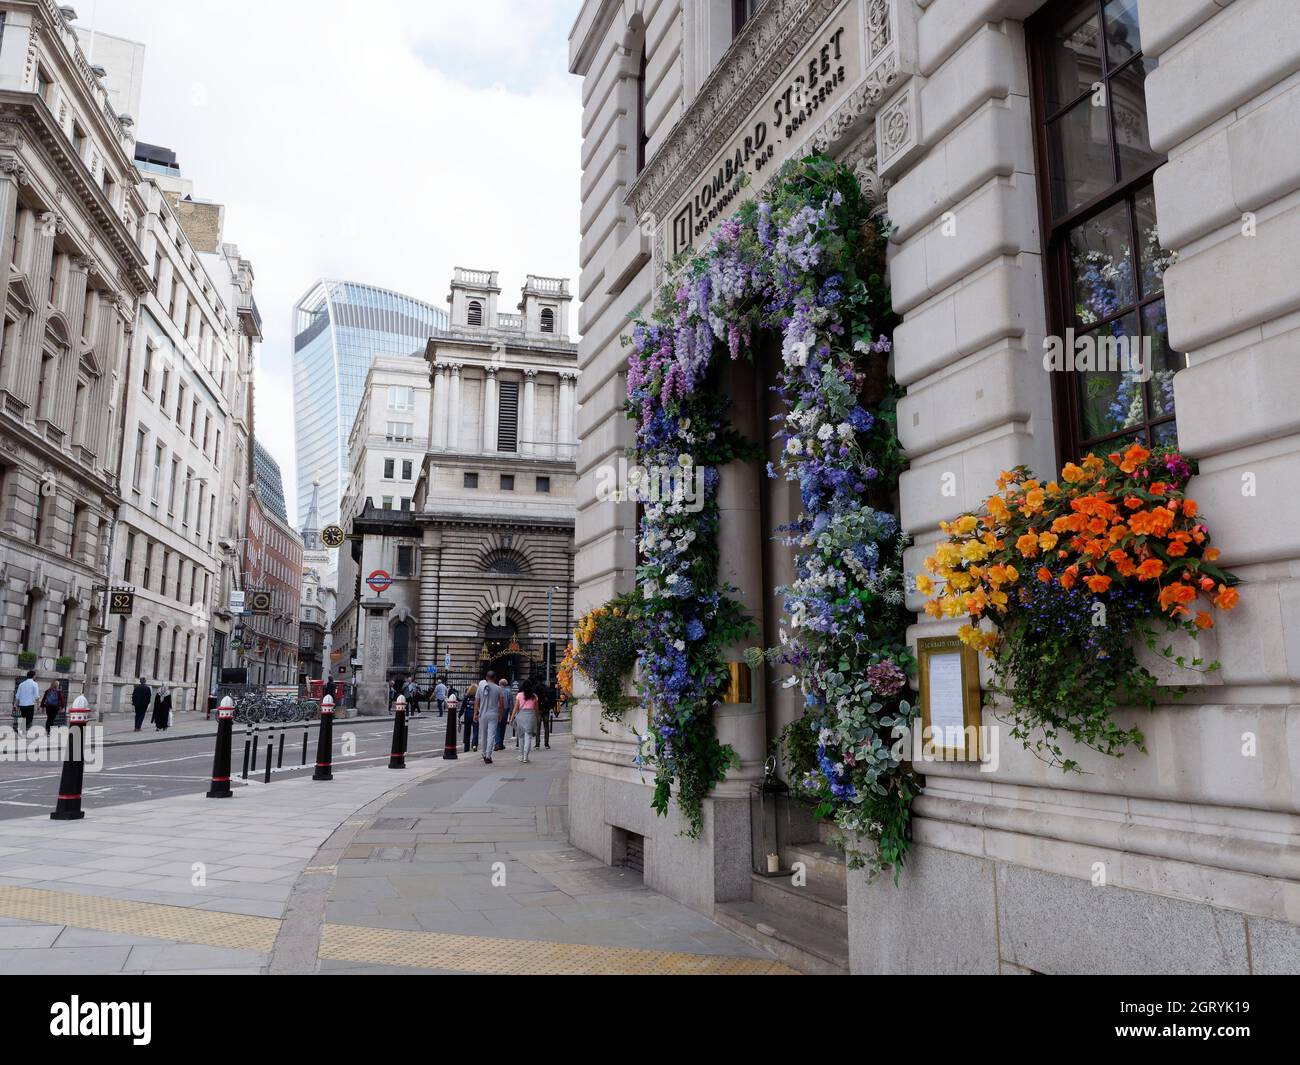 London, Greater London, England, September 21 2021: Brasserie covered with flowers with Bank Underground station and Walkie Talkie Skyscraper behind. Stock Photo